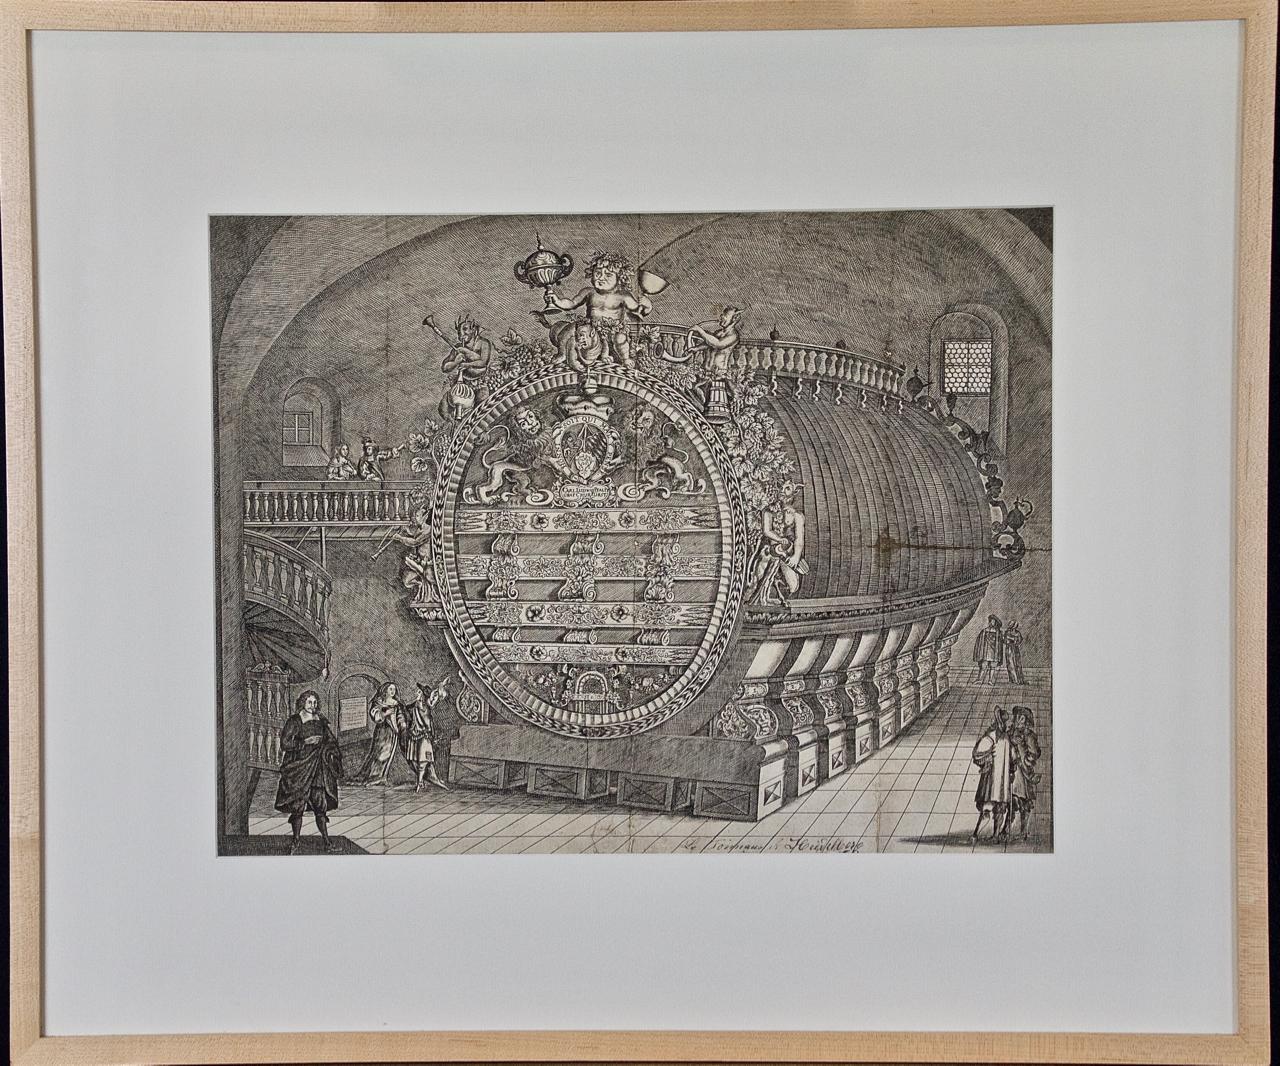 Unknown Interior Print - The Heidelberg Tun: A Framed 17th Century Engraving of a Huge Wine Cask